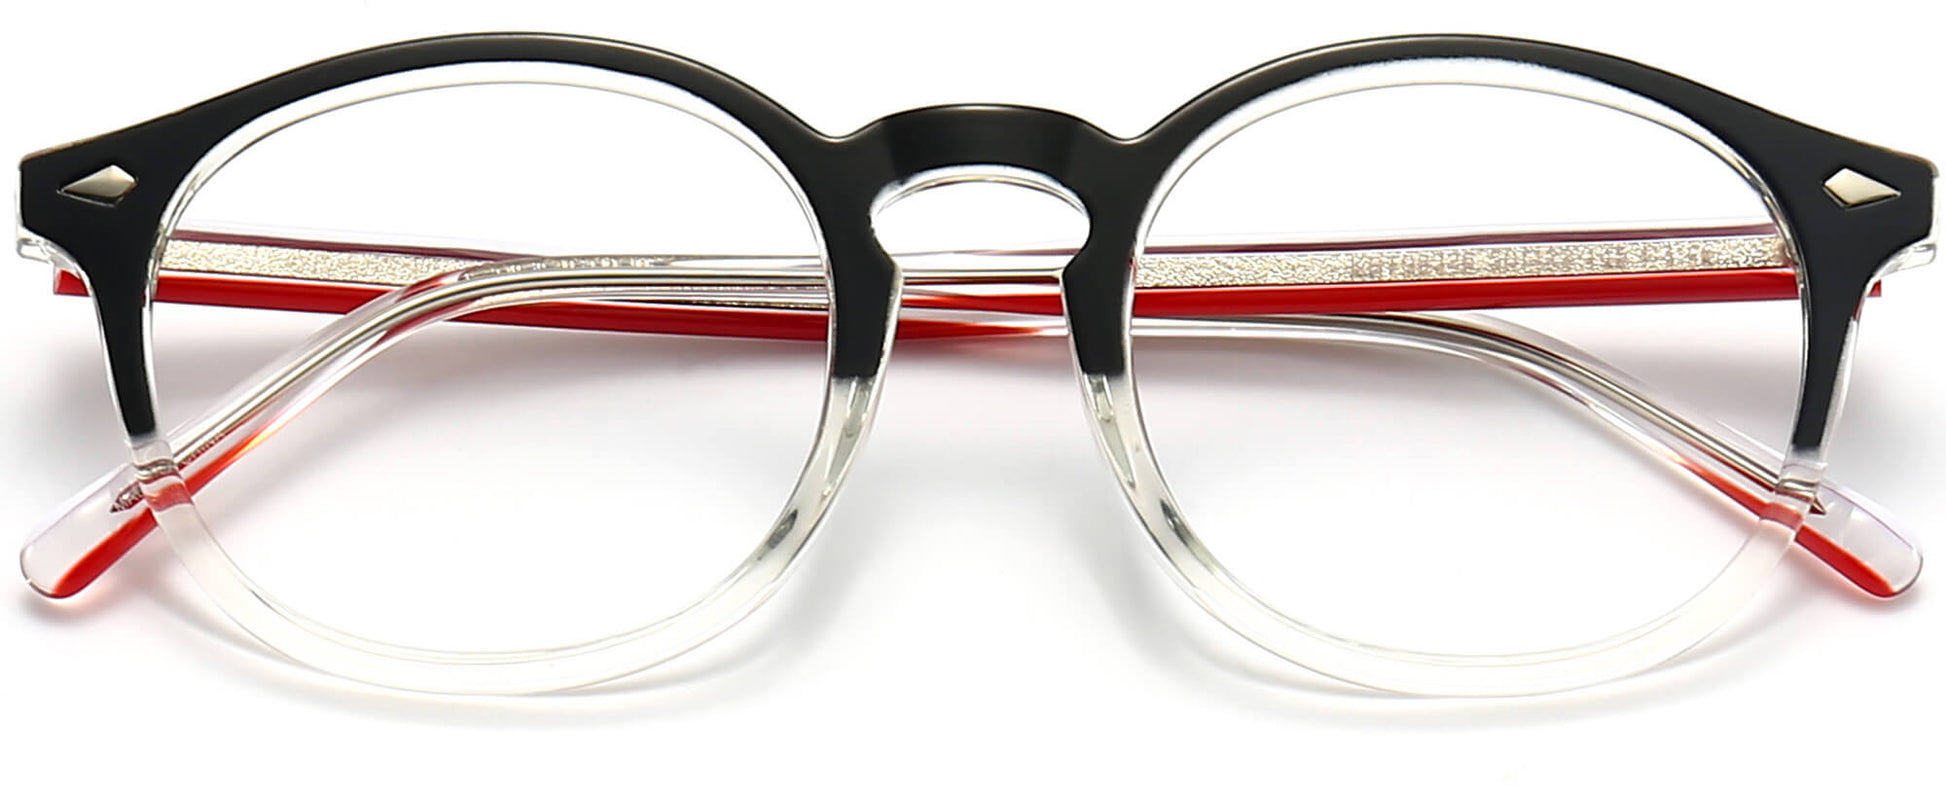 Sonny Round Black Eyeglasses from ANRRI, closed view